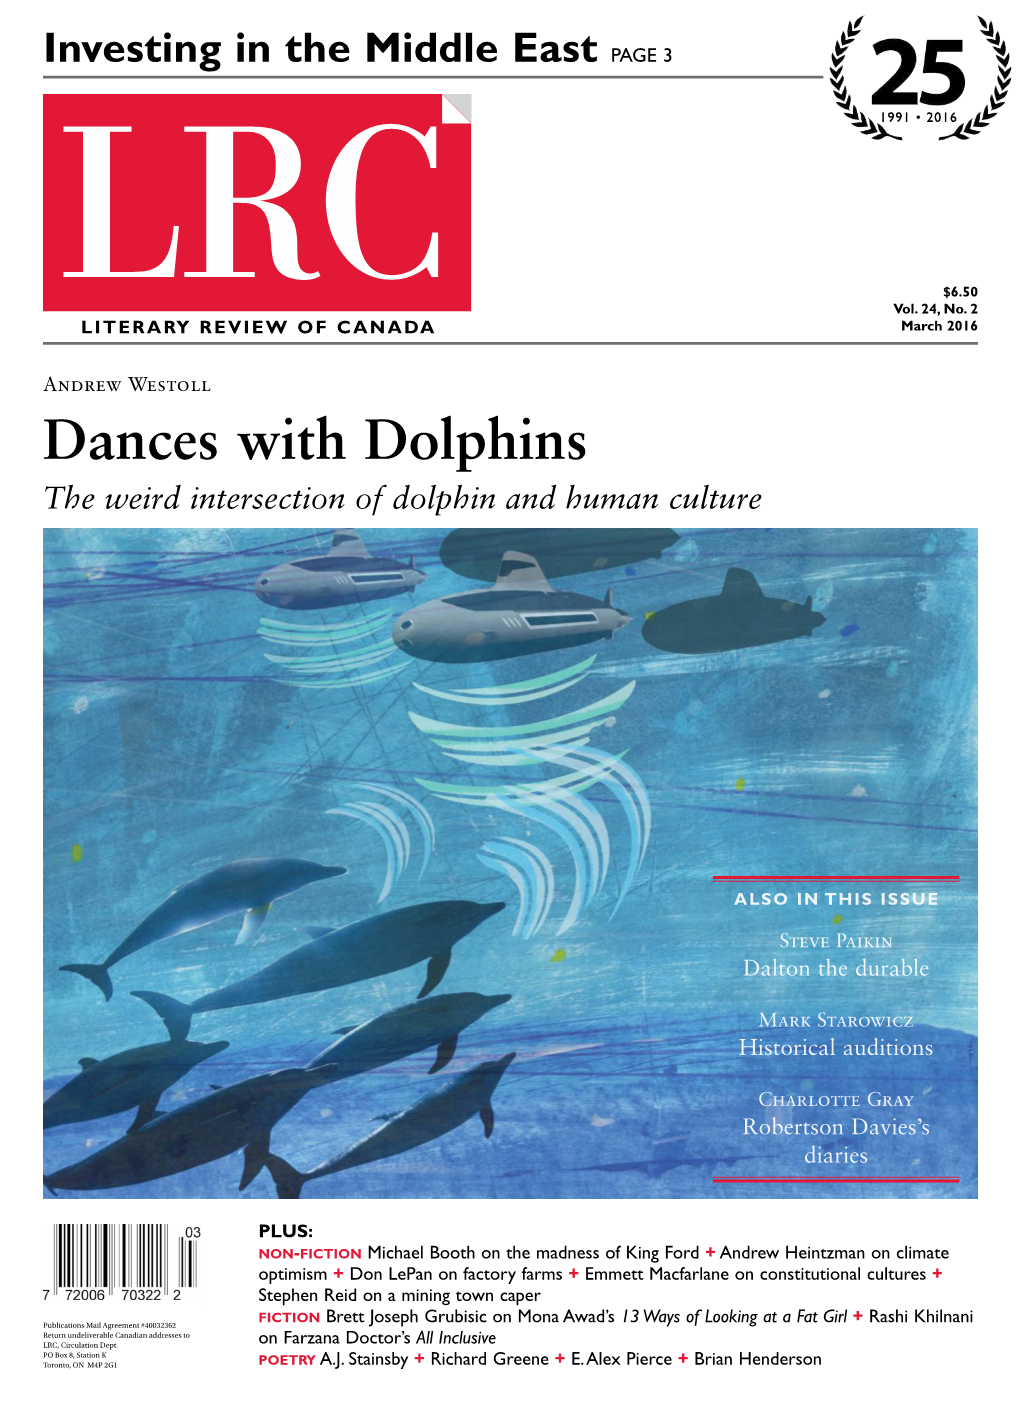 Dances with Dolphins the Weird Intersection of Dolphin and Human Culture